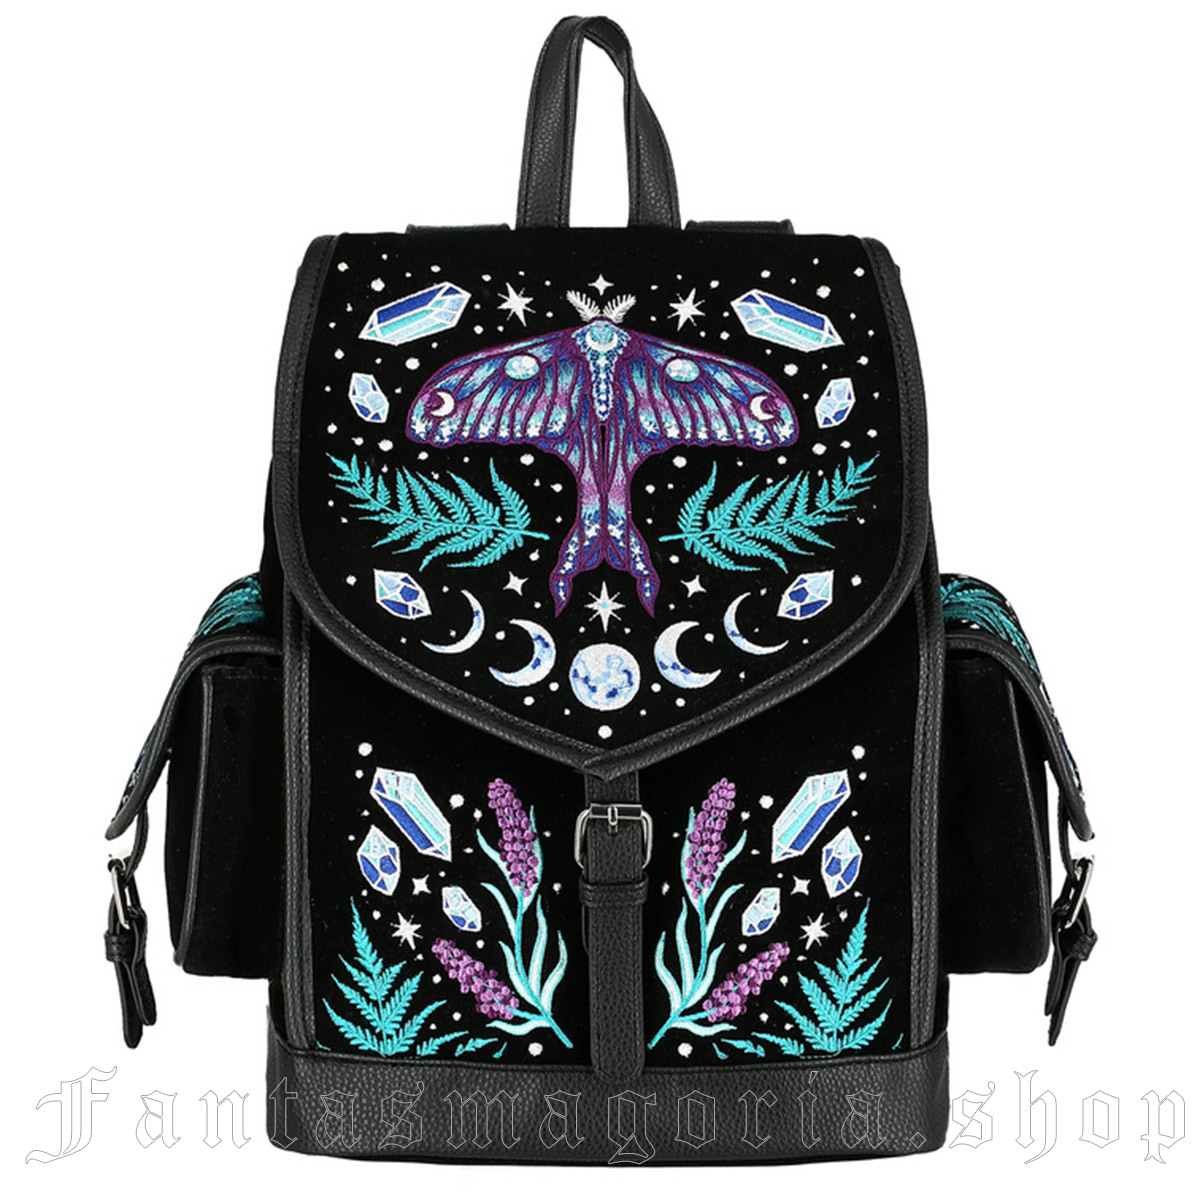 Gothic black embroidered moth motif backpack. - Restyle - RES5900949919539